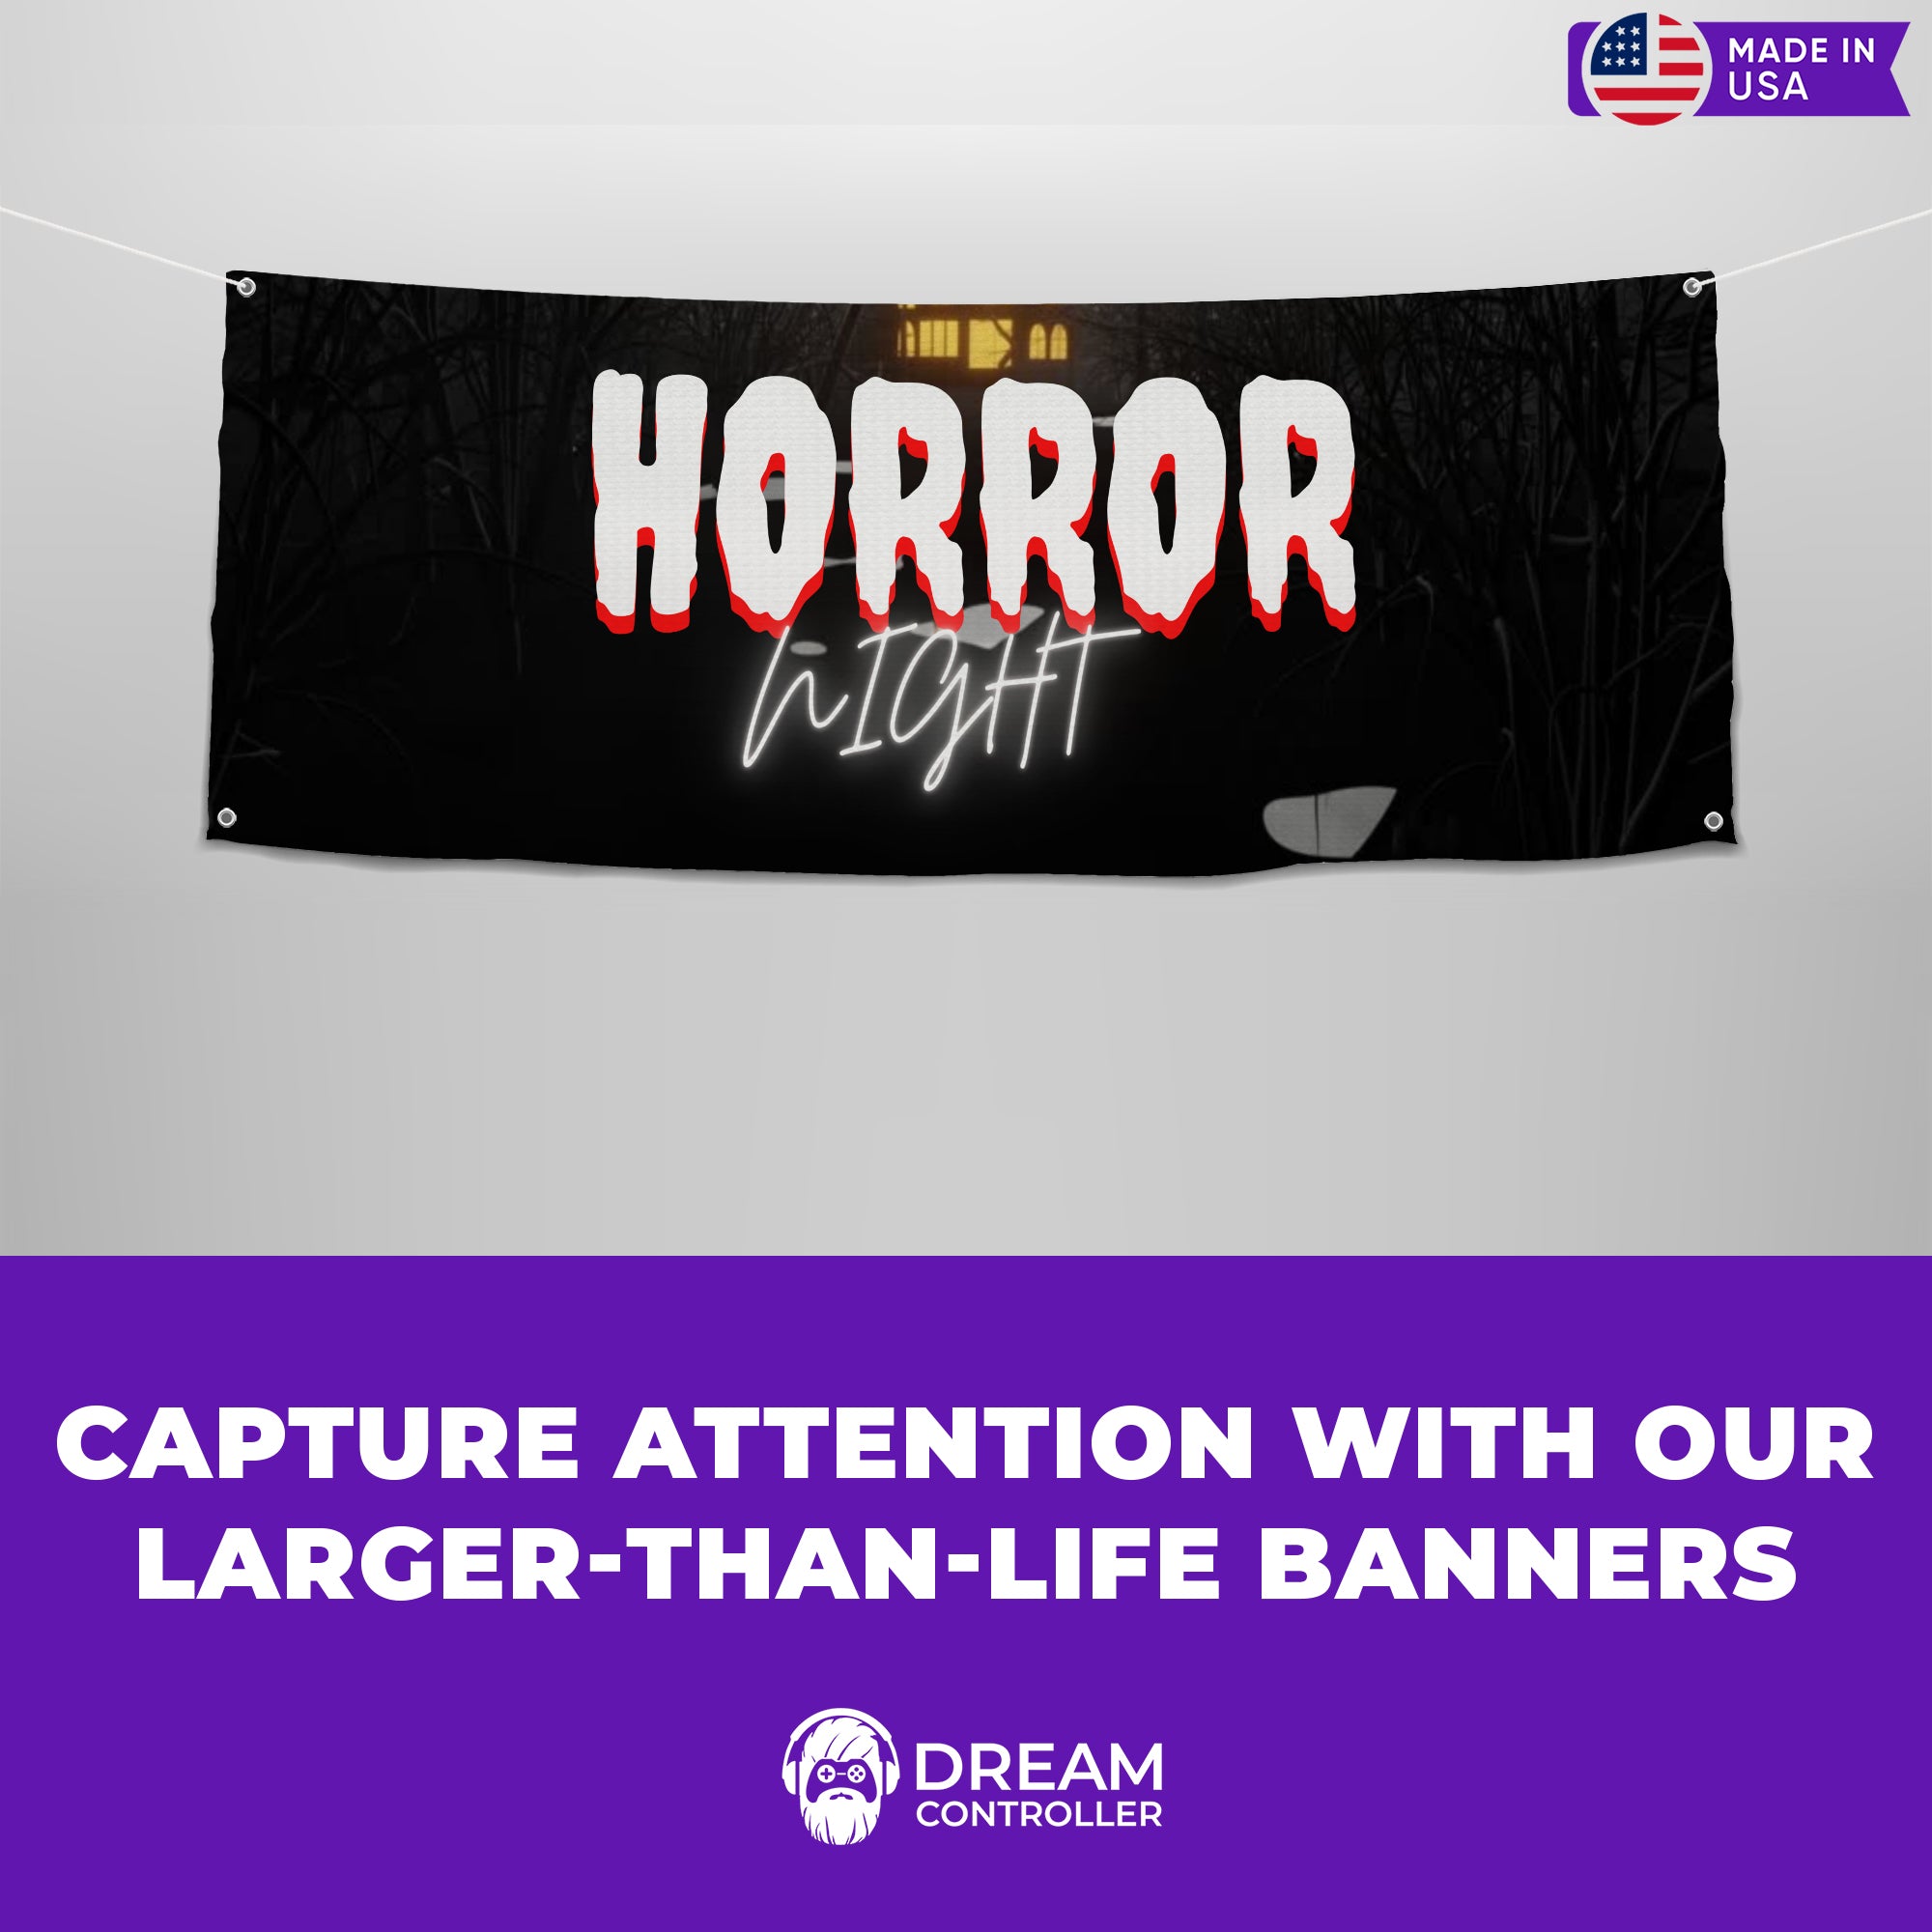 Horror Night Black Halloween Banner - Superior quality, Fade-resistant fabric